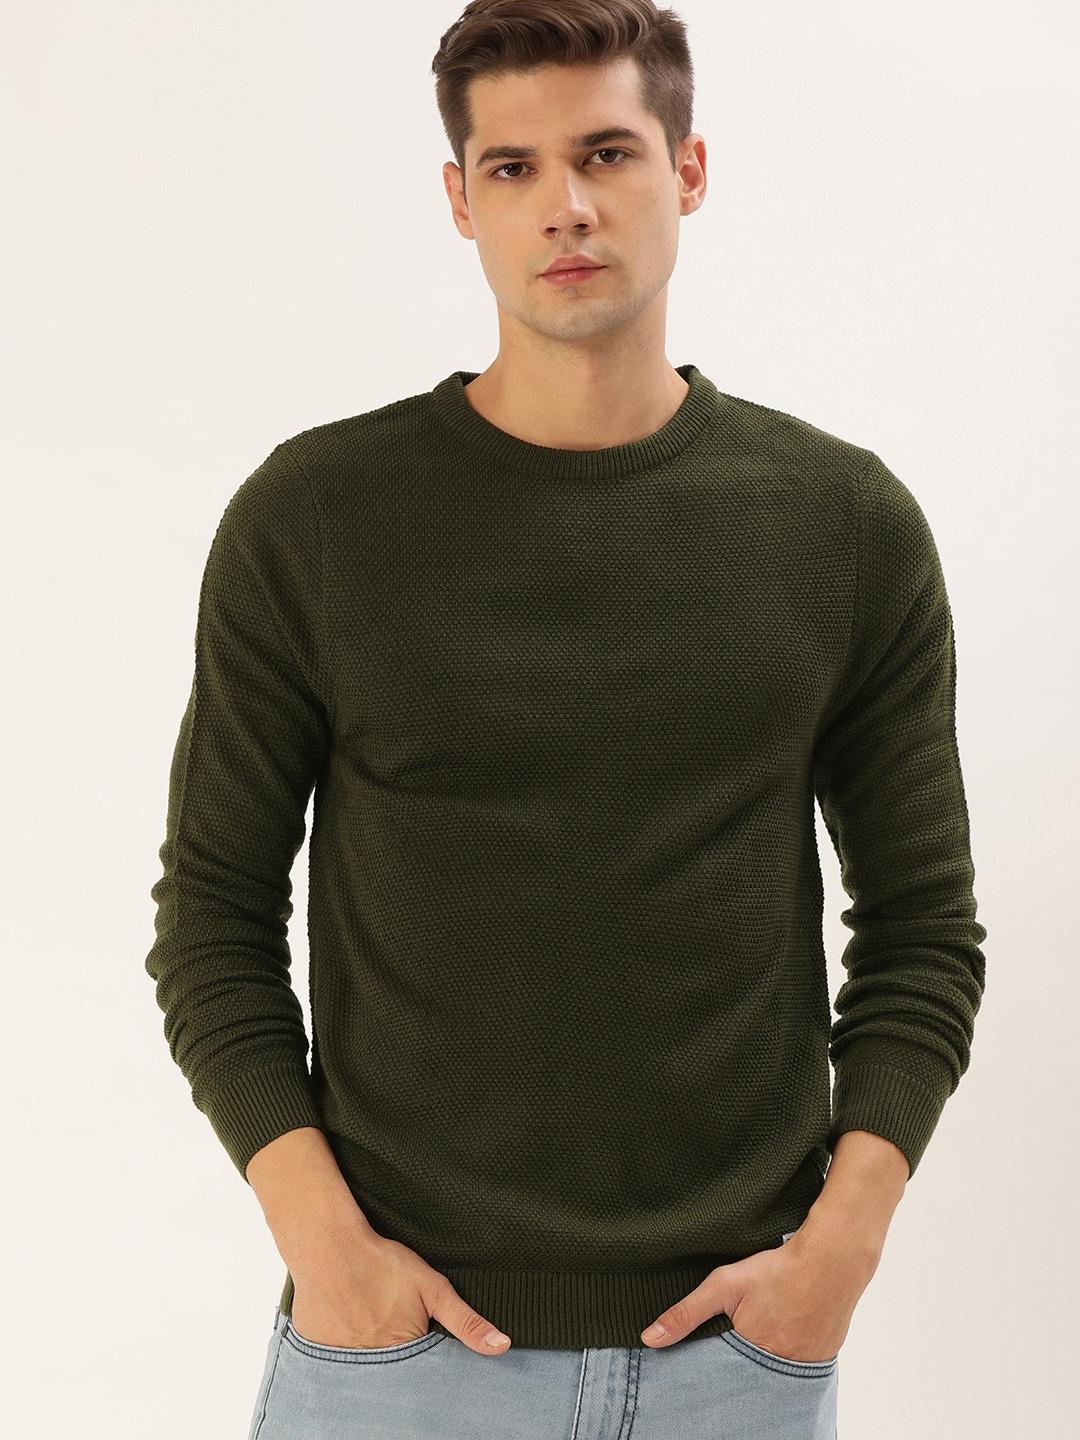 flying-machine-men-olive-green-boucle-pullover-sweater